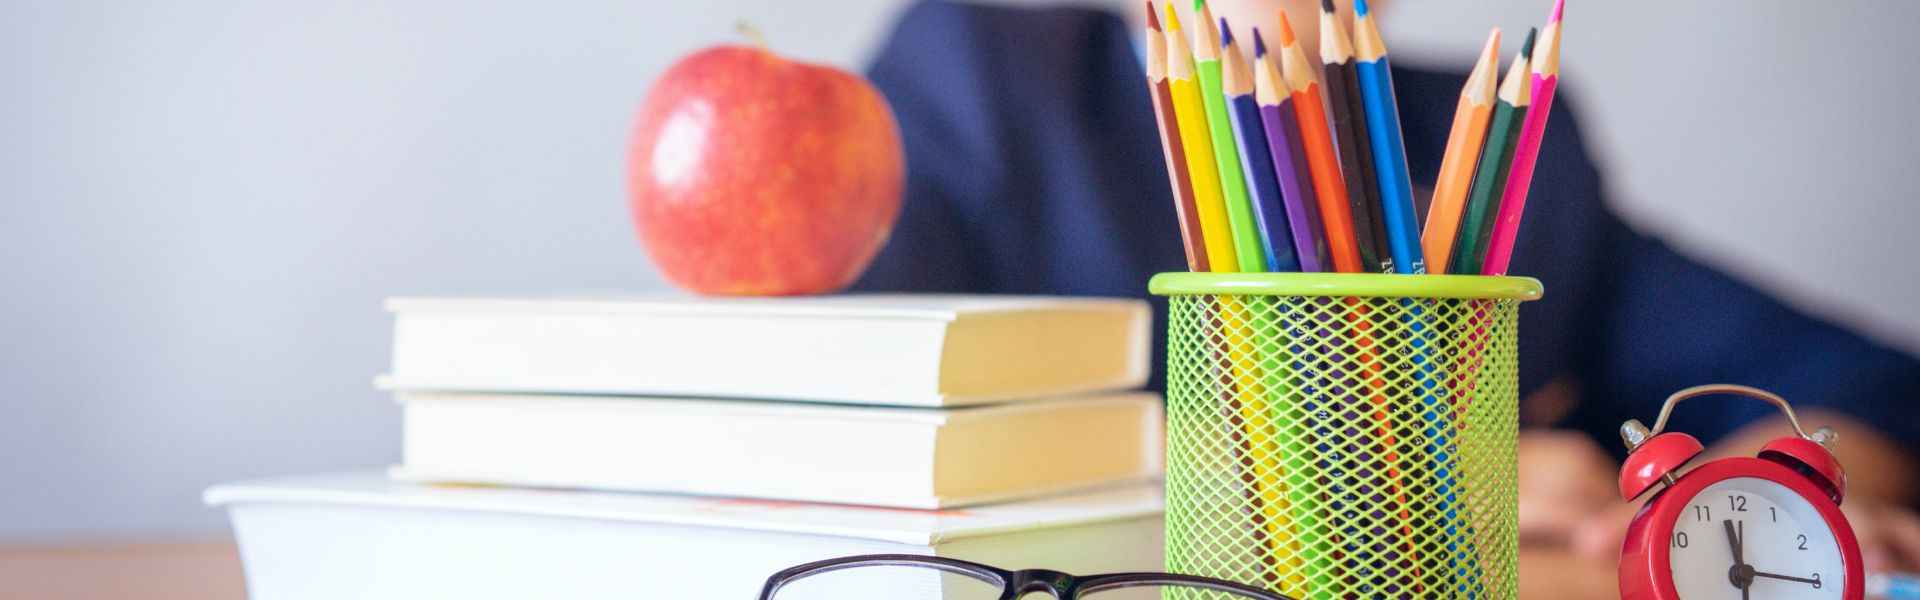 school stationery and books on a desk